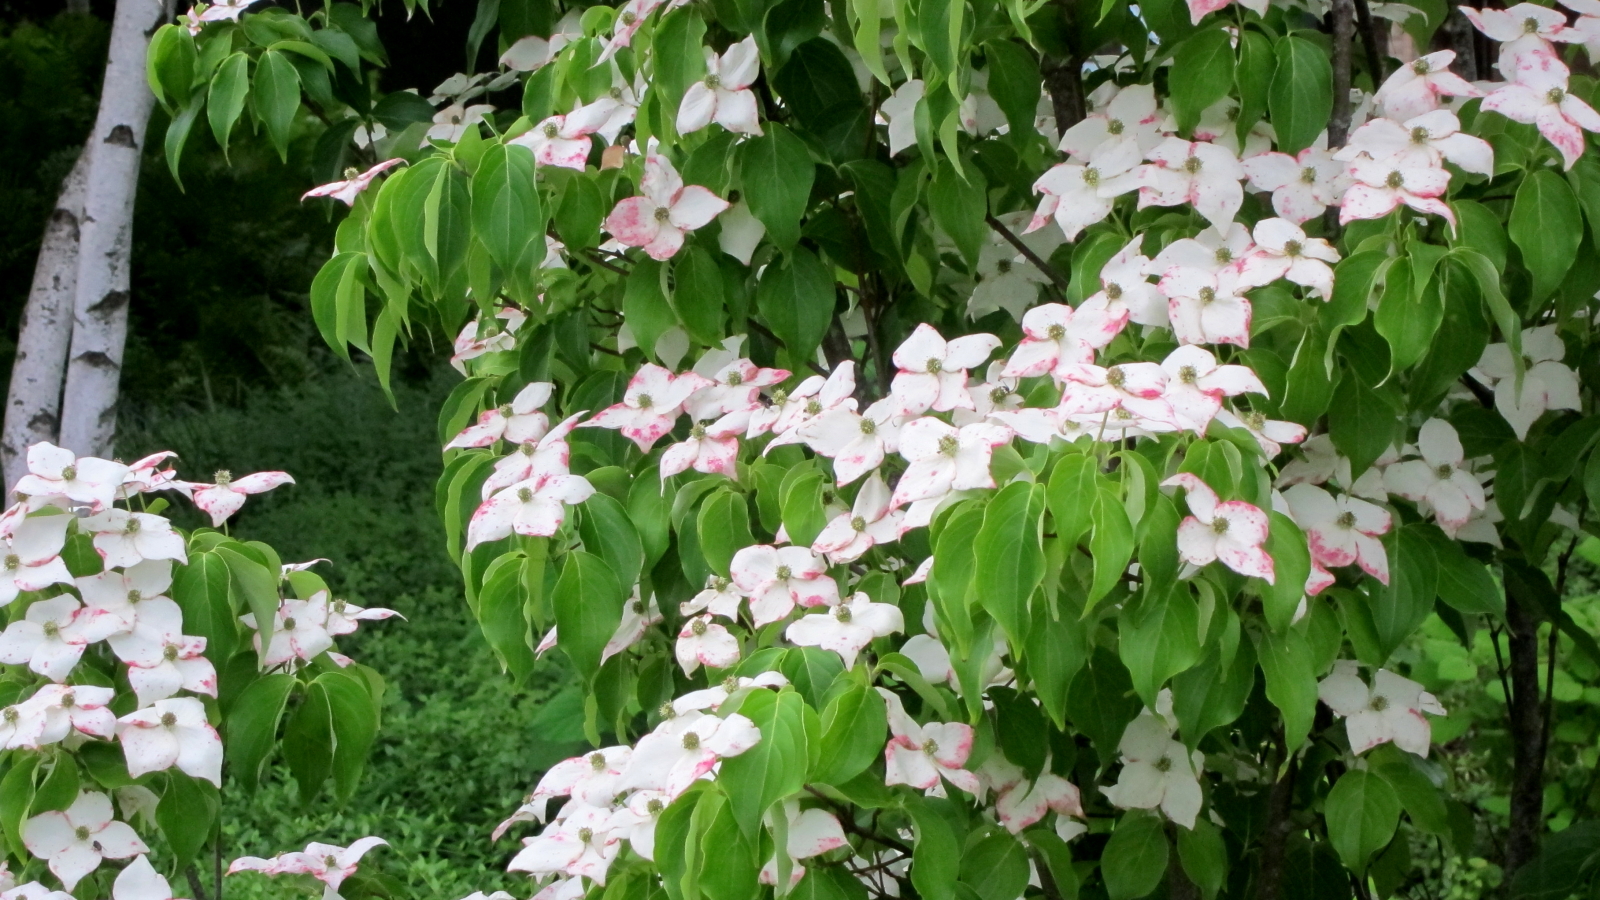 a flowering tree with white flowers and green leaves